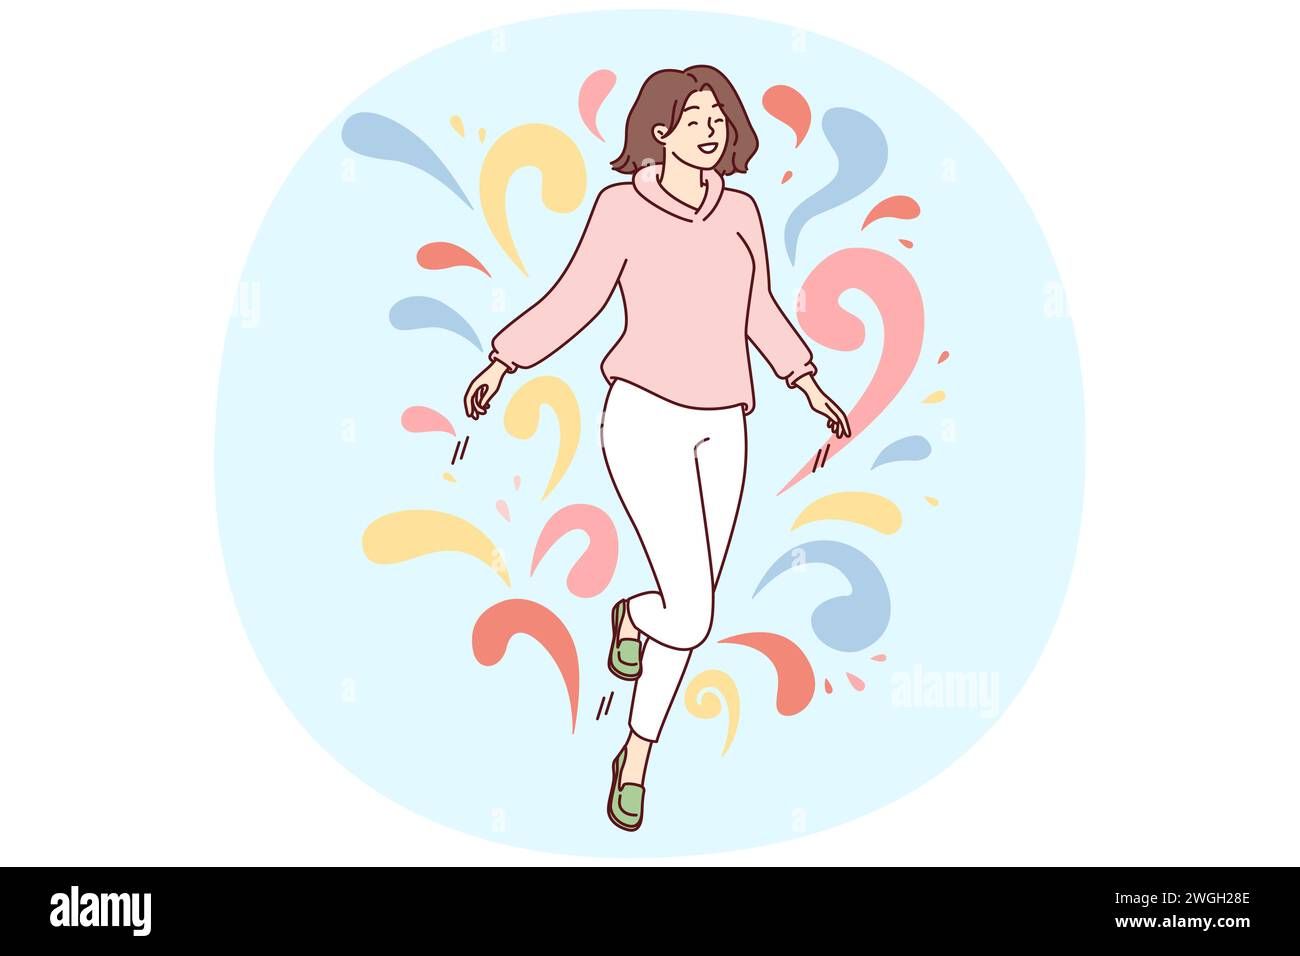 Woman walks in weightlessness and waves arms located among multi-colored drops flying in different directions. Carefree girl feels happy after dating or taking antidepressants. Flat vector design Stock Vector